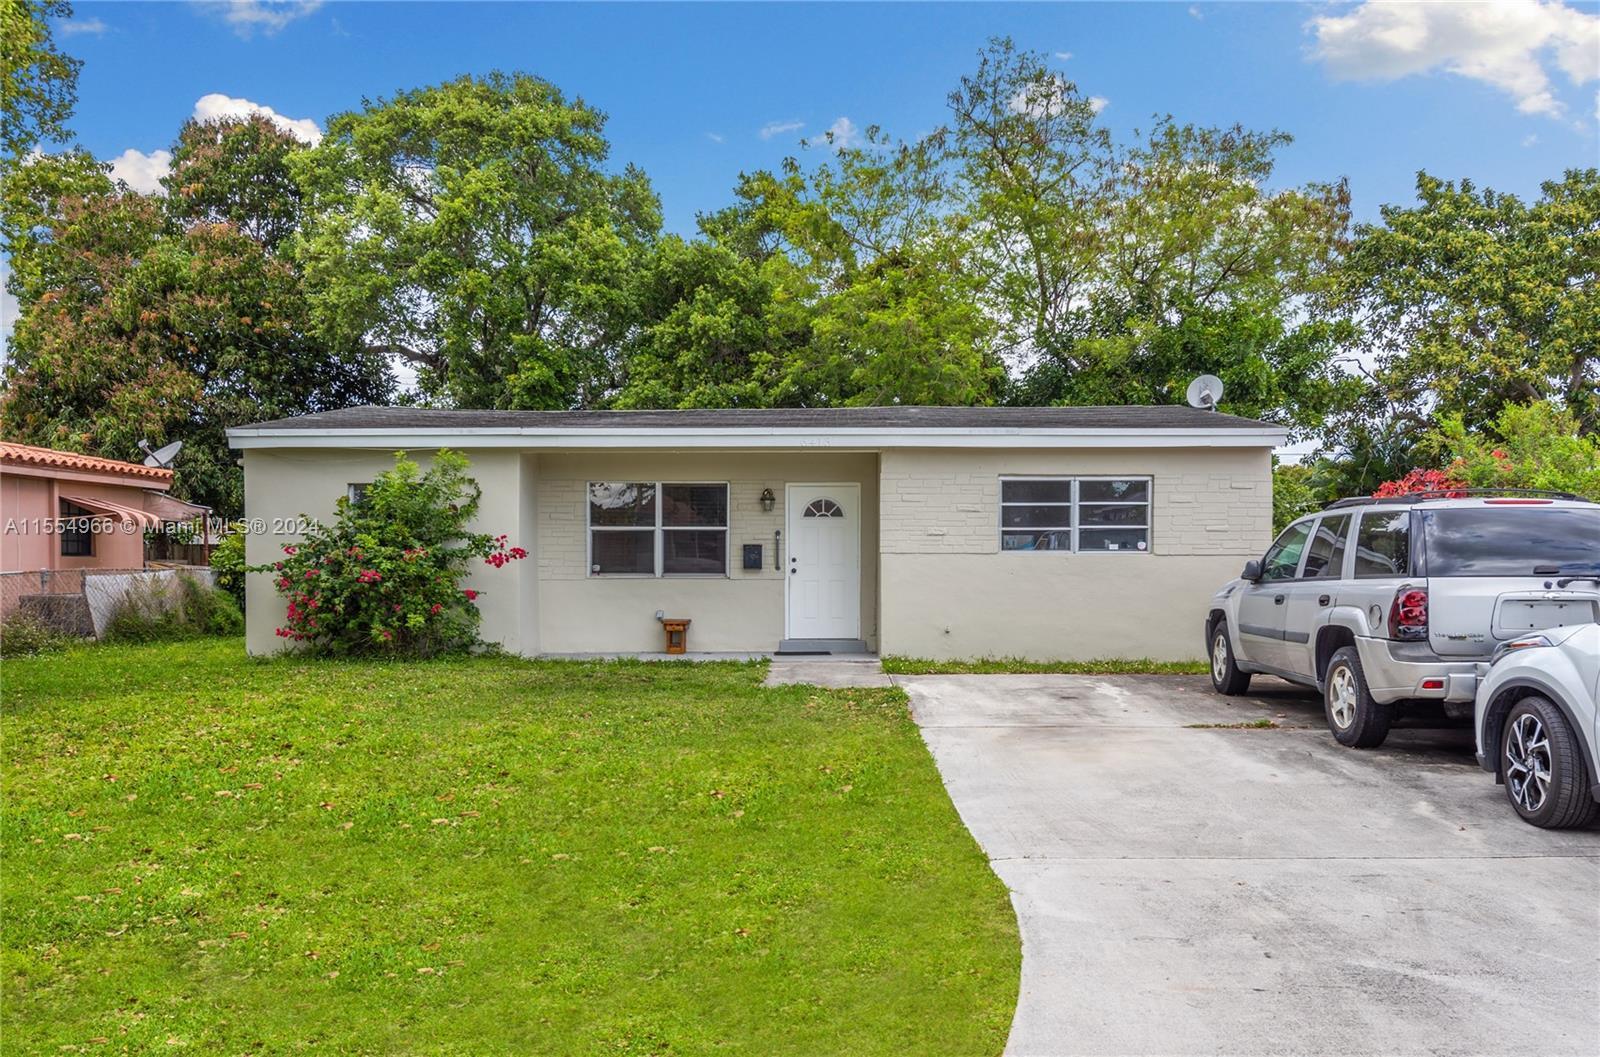 Photo of 6413 Grant Ct in Hollywood, FL